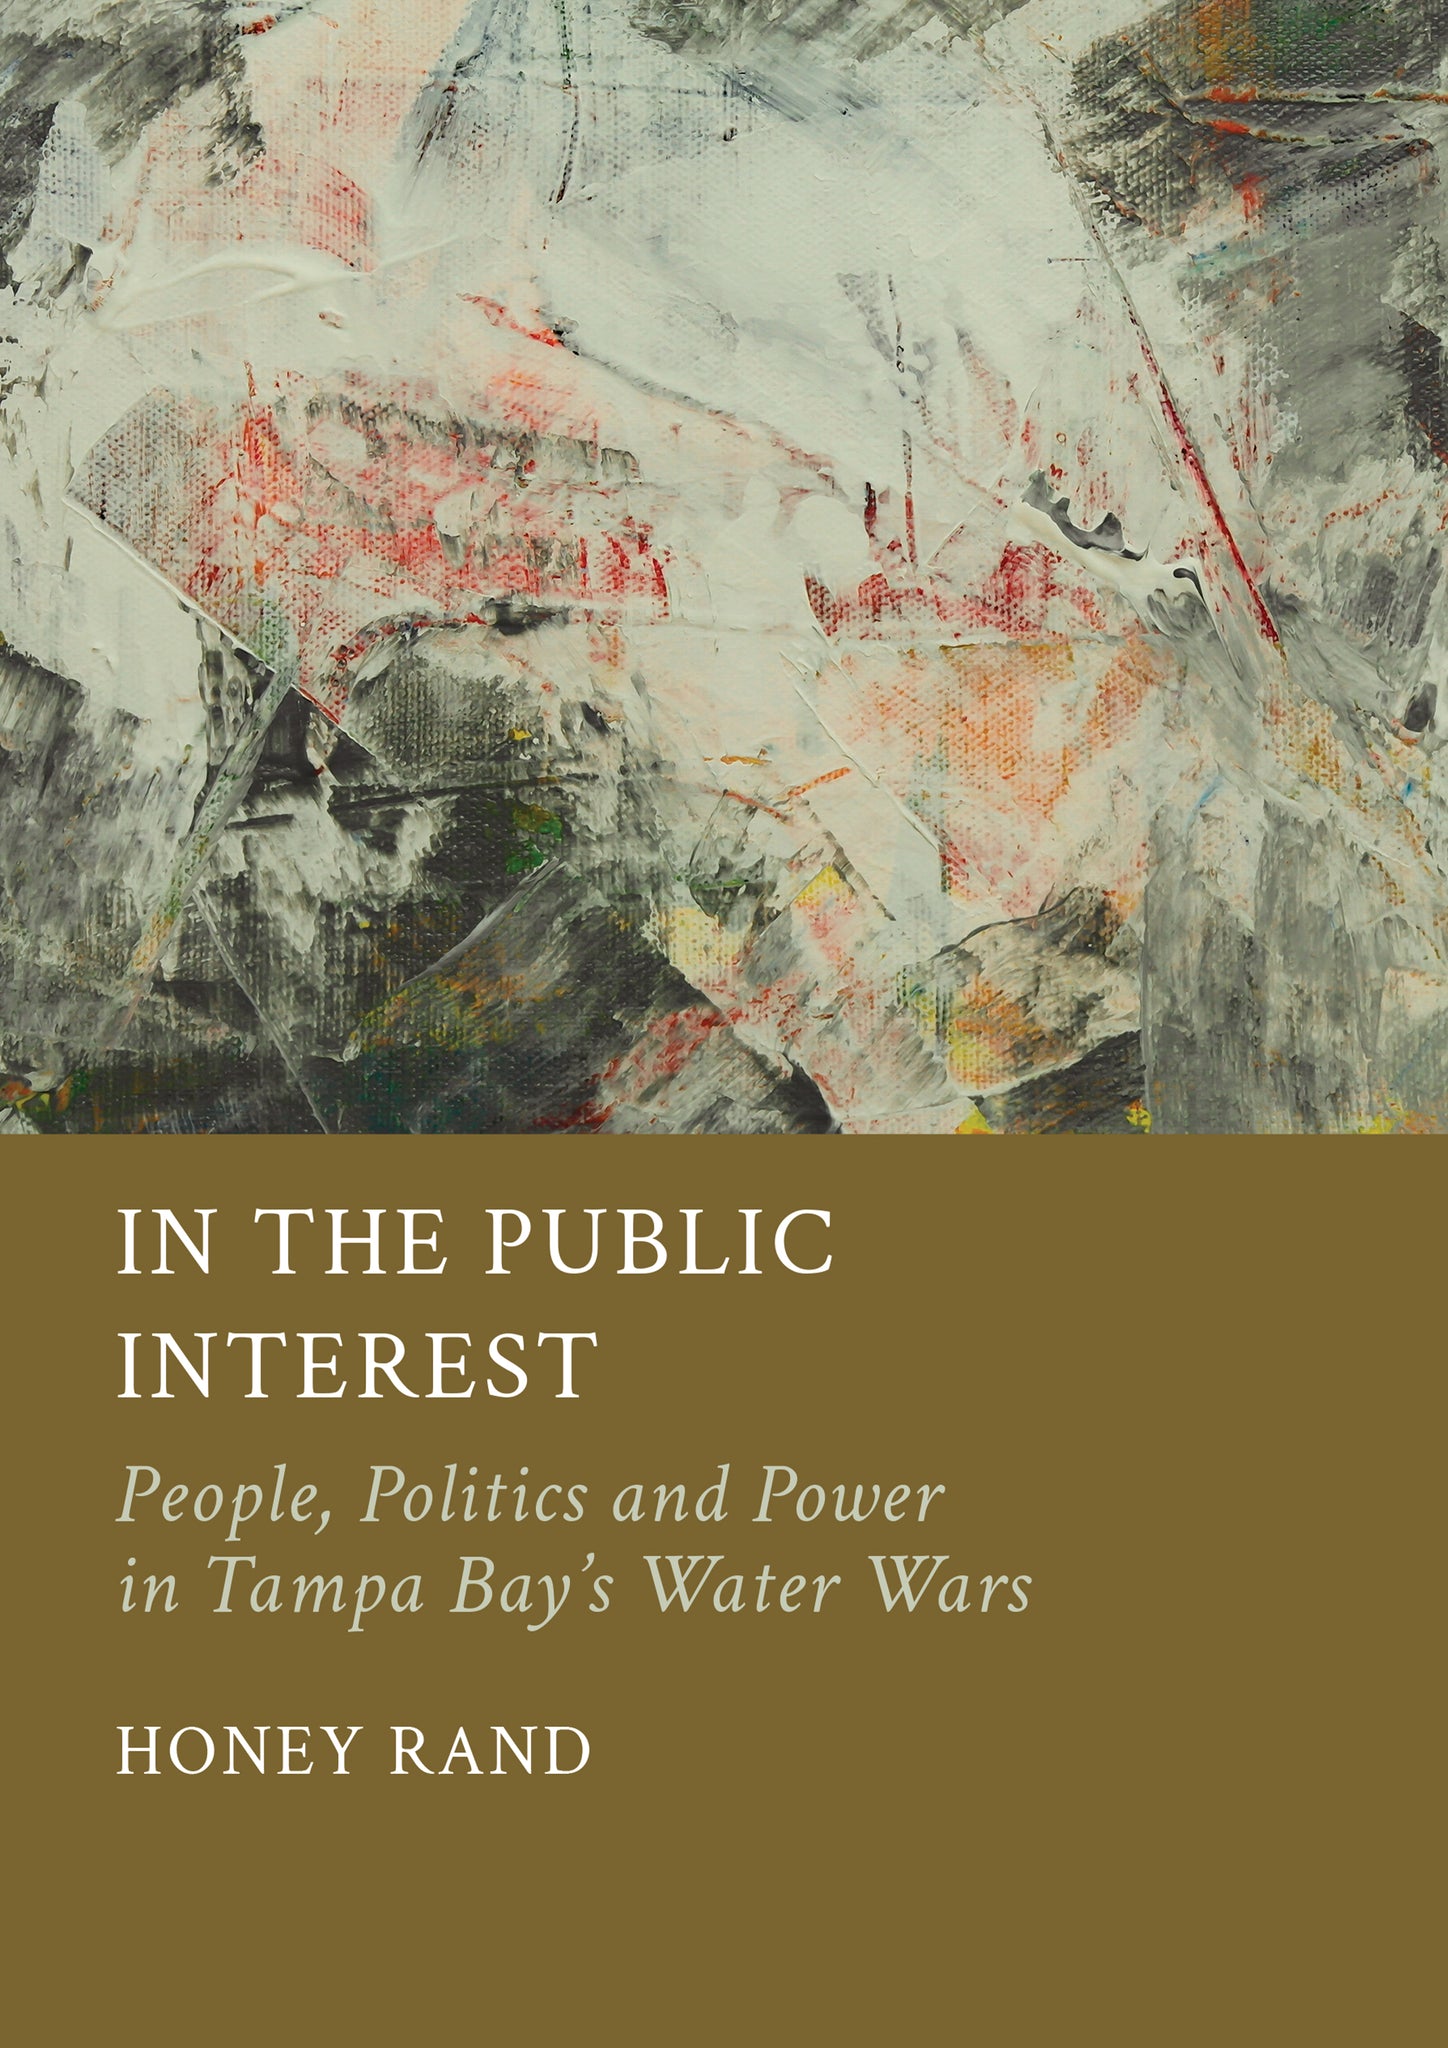 In the Public Interest: People, Politics and Power in Tampa Bay’s Water Wars